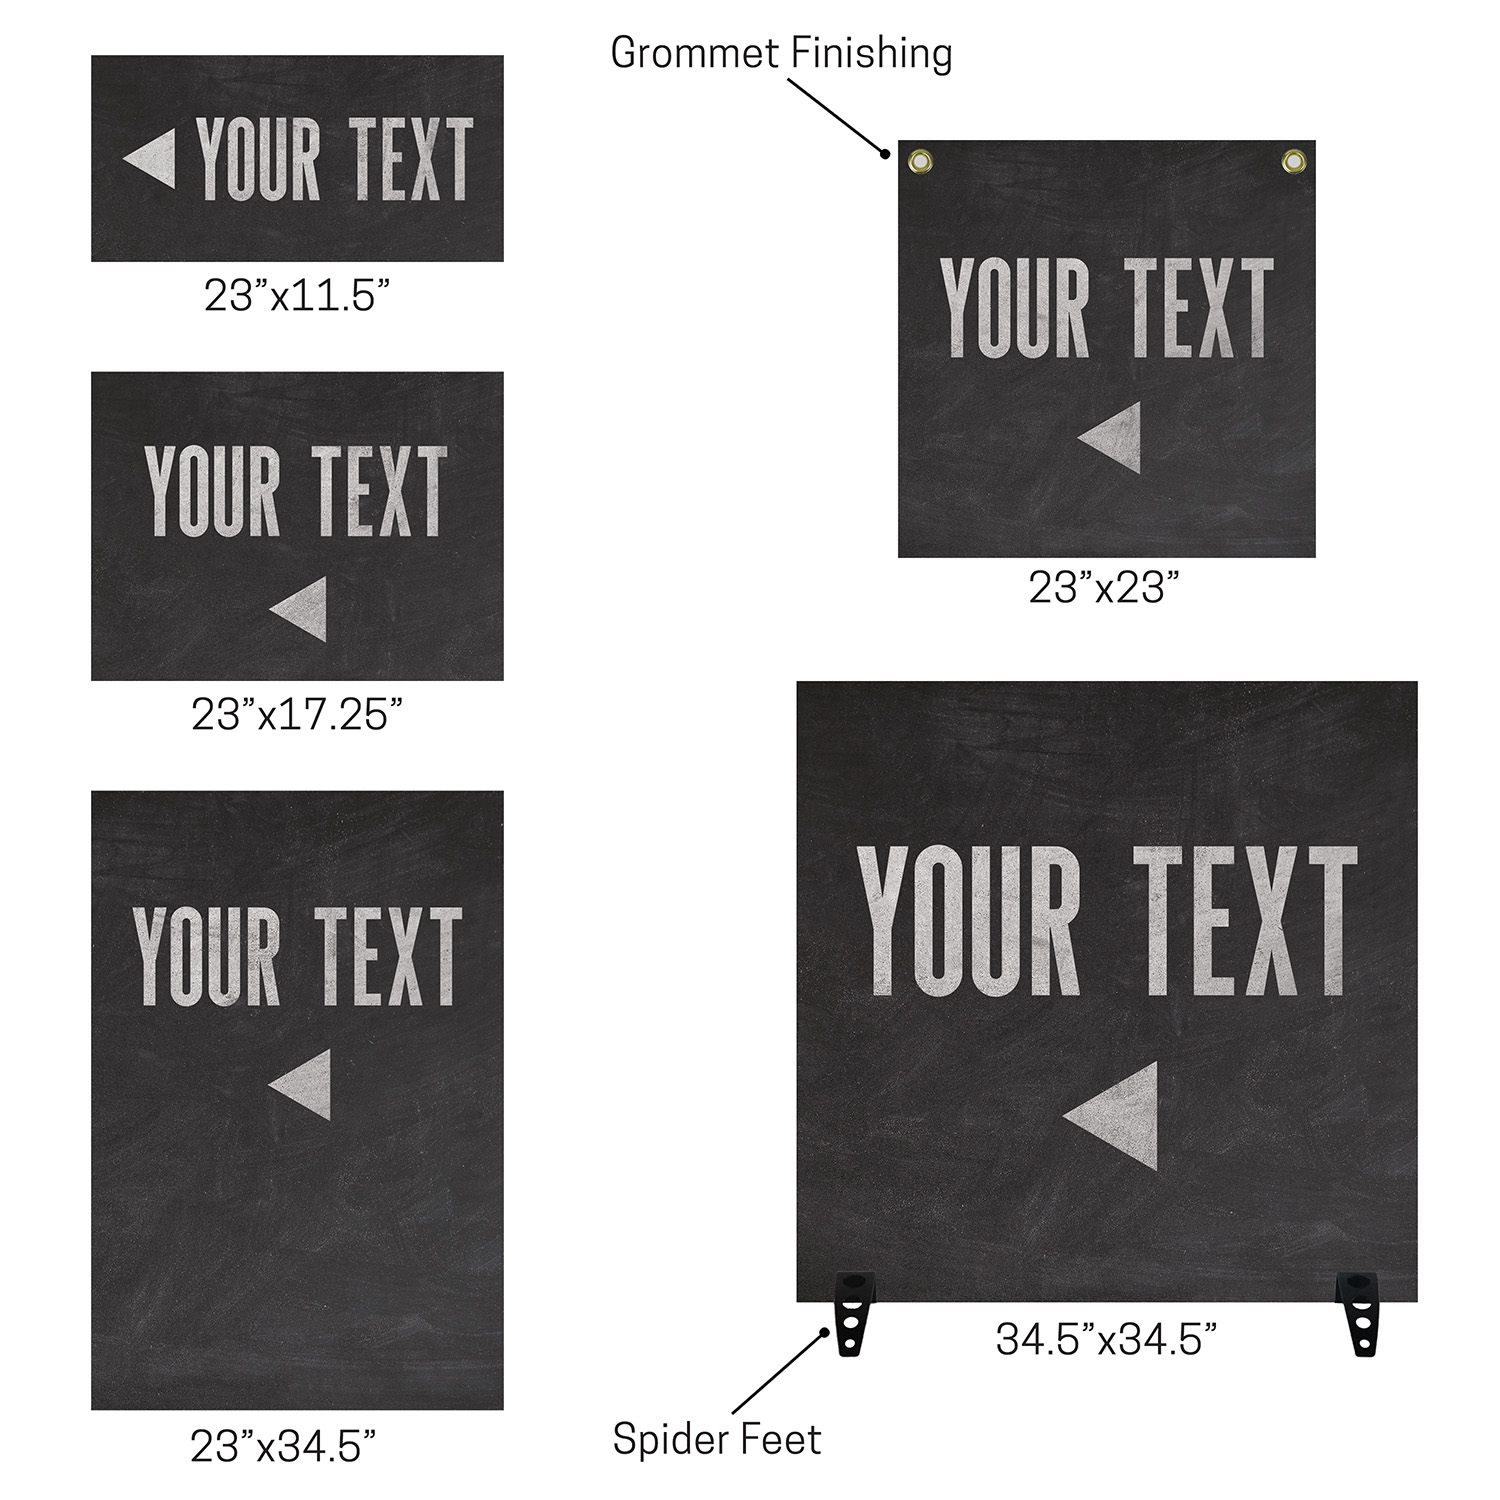 Rigid Signs, Aurora Lights Your Text Here, 23 x 34.5 2